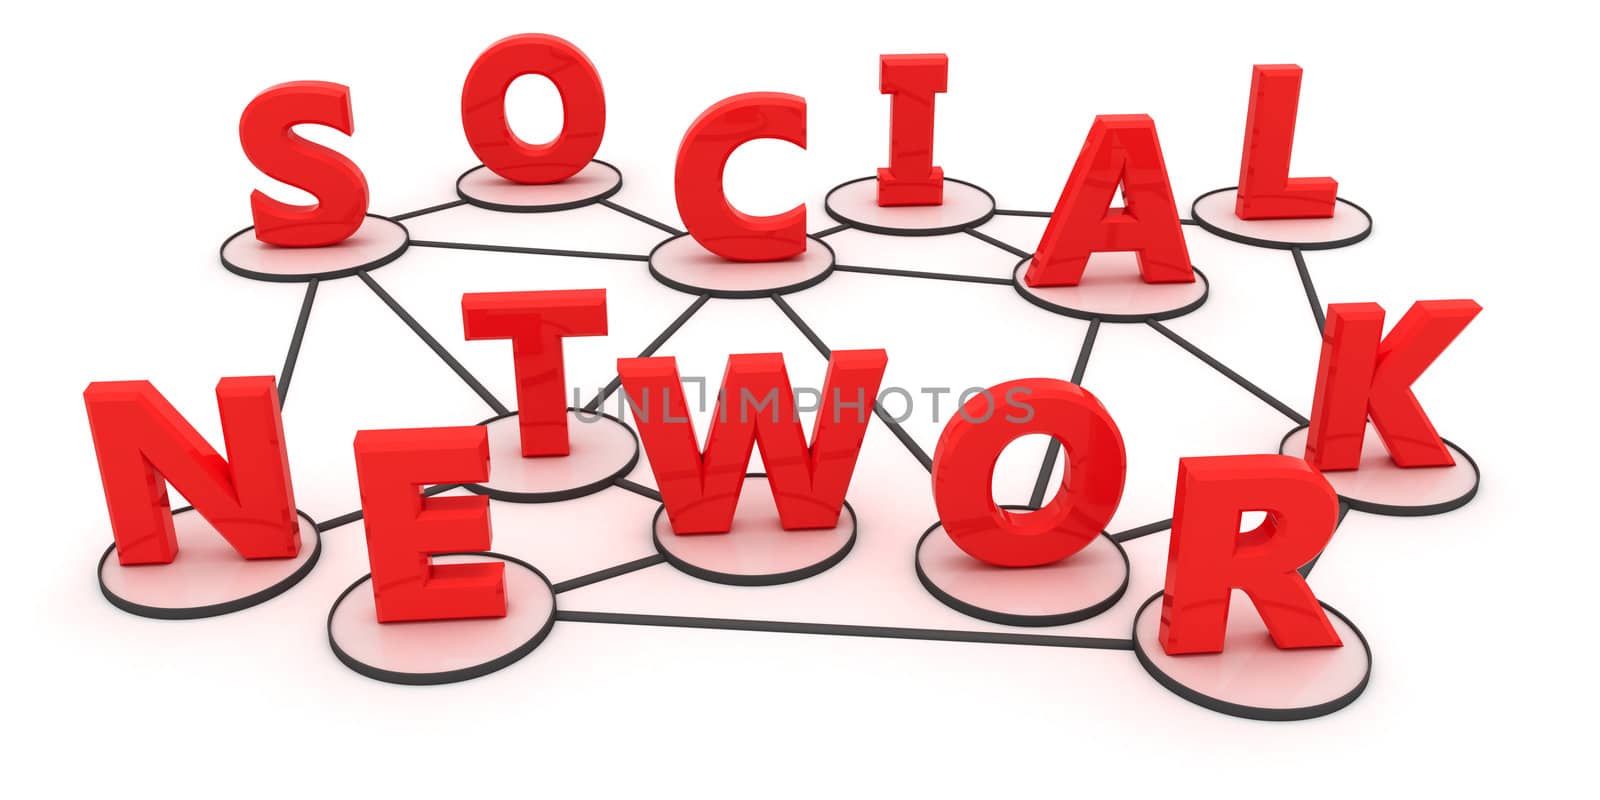 Letters of the words "social network" are intertwined in the form of the concept of social network